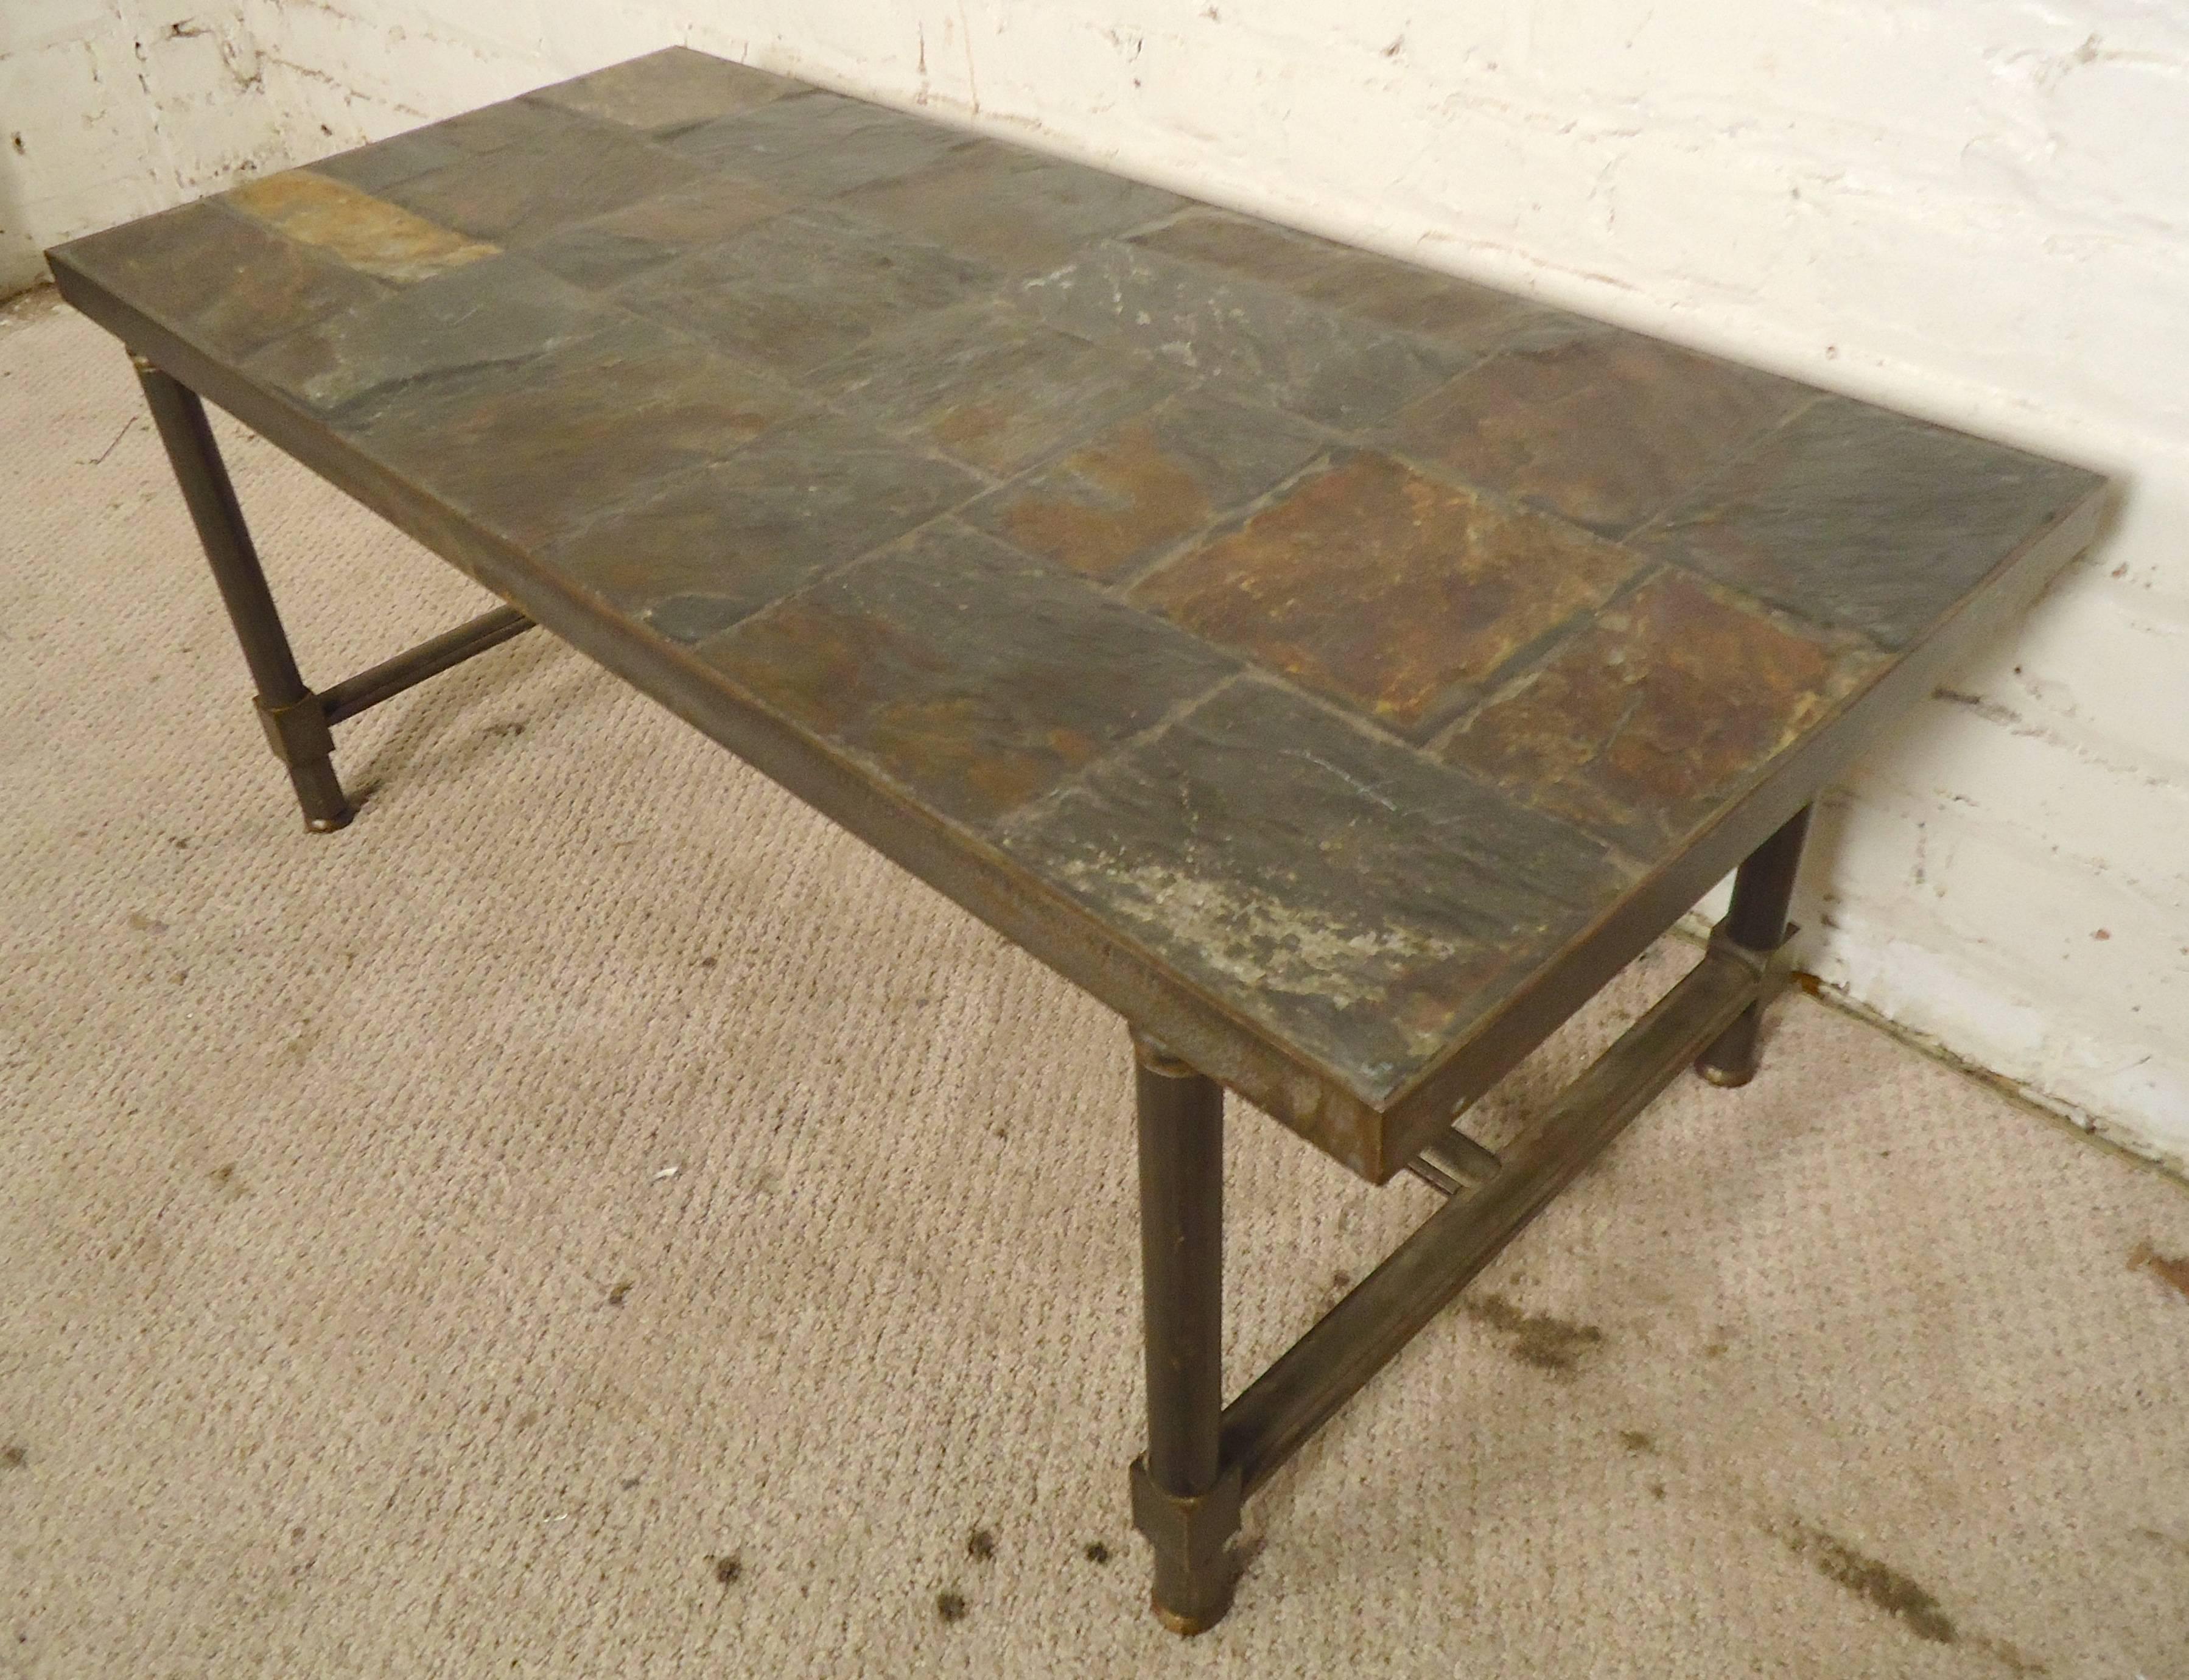 Beautiful iron table with patchwork style slate top. This heavy duty table can be used indoors or out.

(Please confirm item location - NY or NJ - with dealer)
